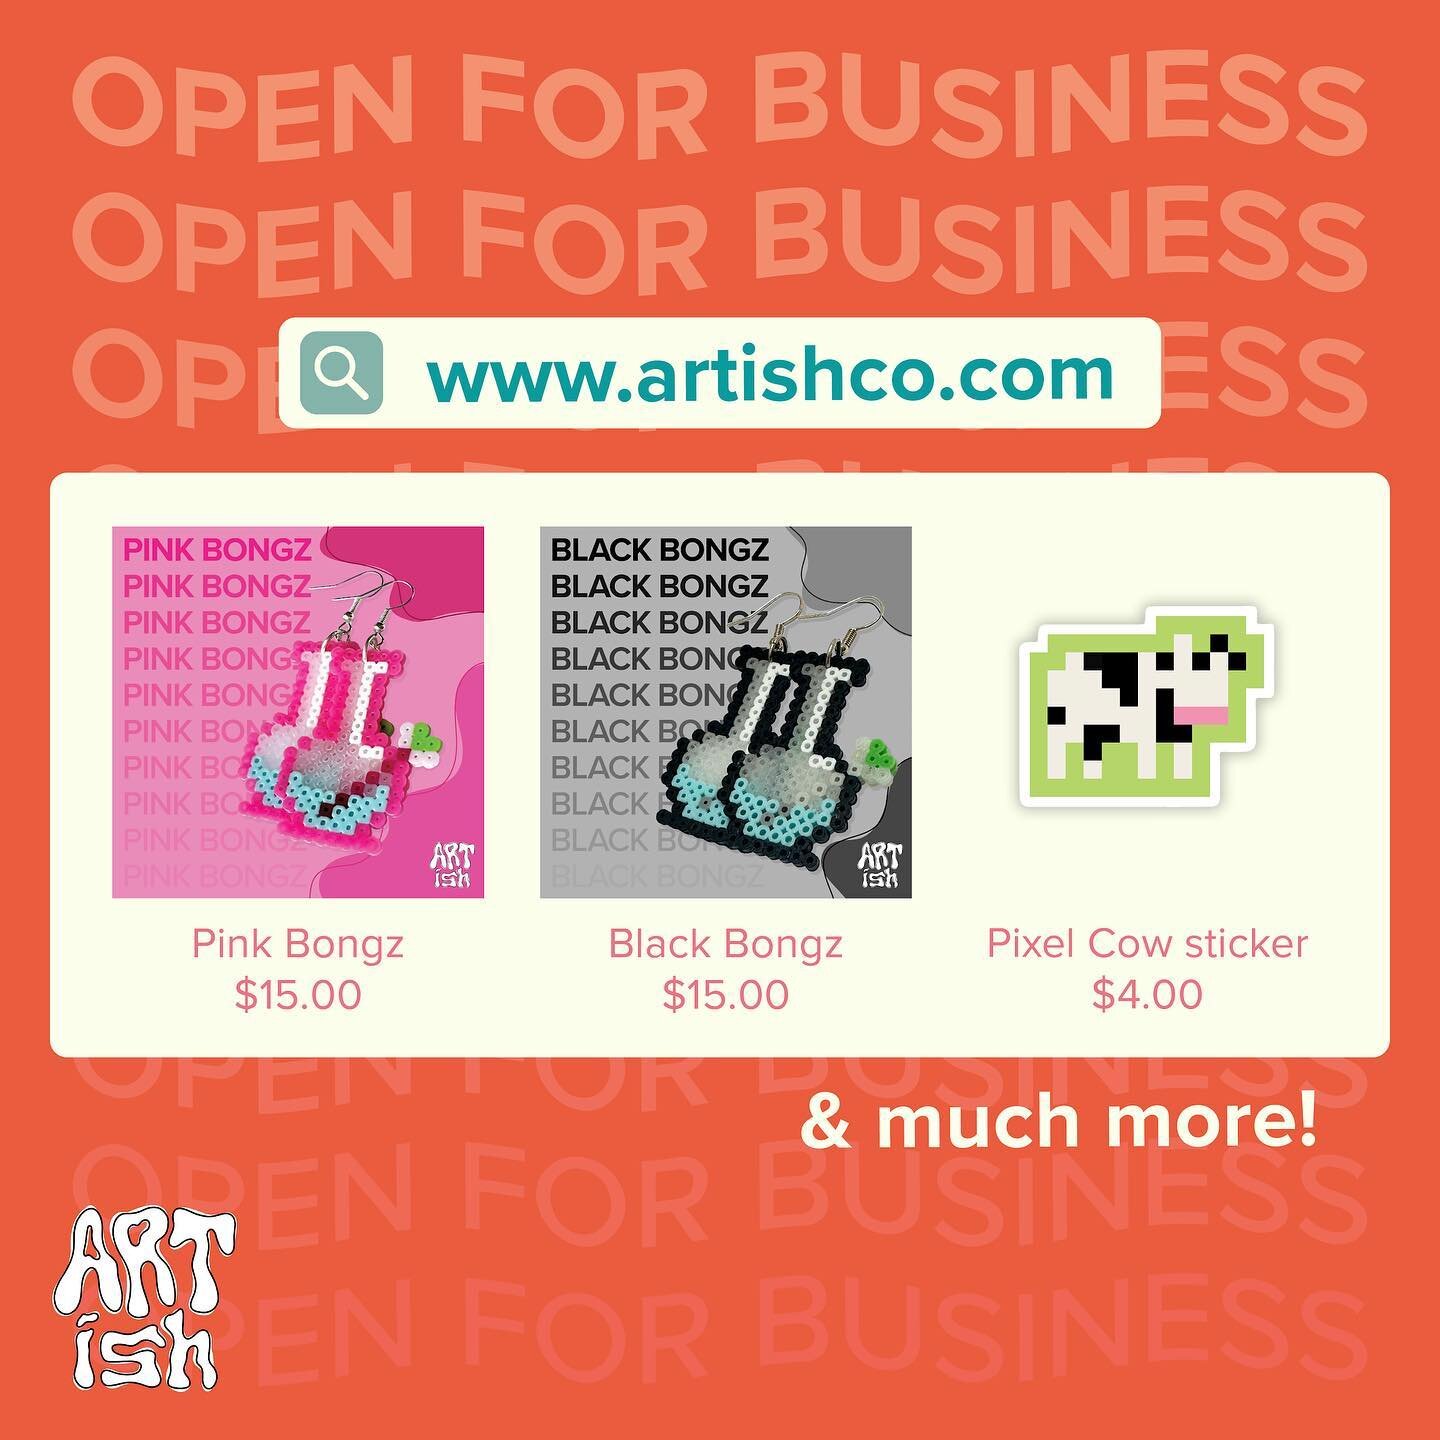 WE ARE LIVE!!!!!!

artishco.com is officially open for business!!

on the shop right now we have our rainbow bongz earring collection as well as some fun stickers!! check it out 🌀